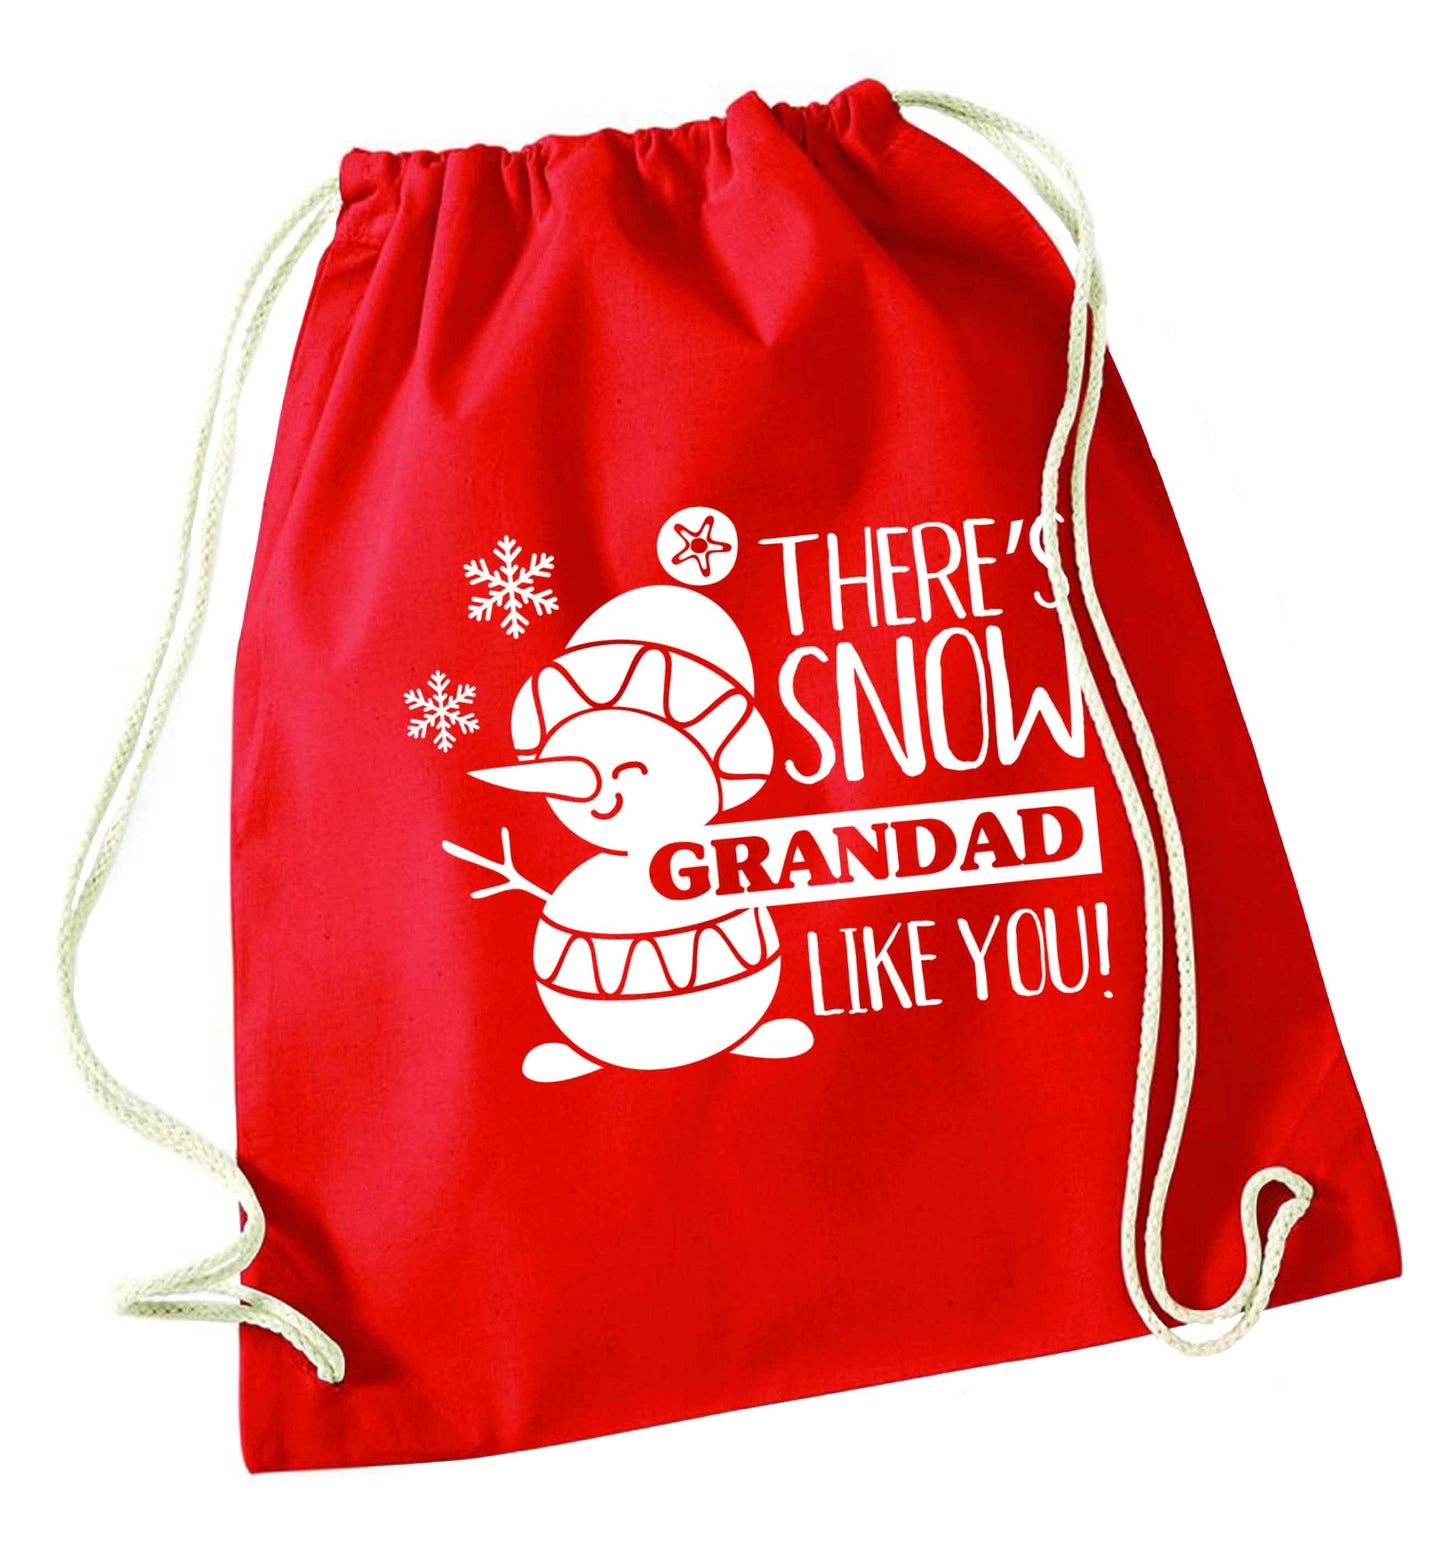 There's snow grandad like you red drawstring bag 